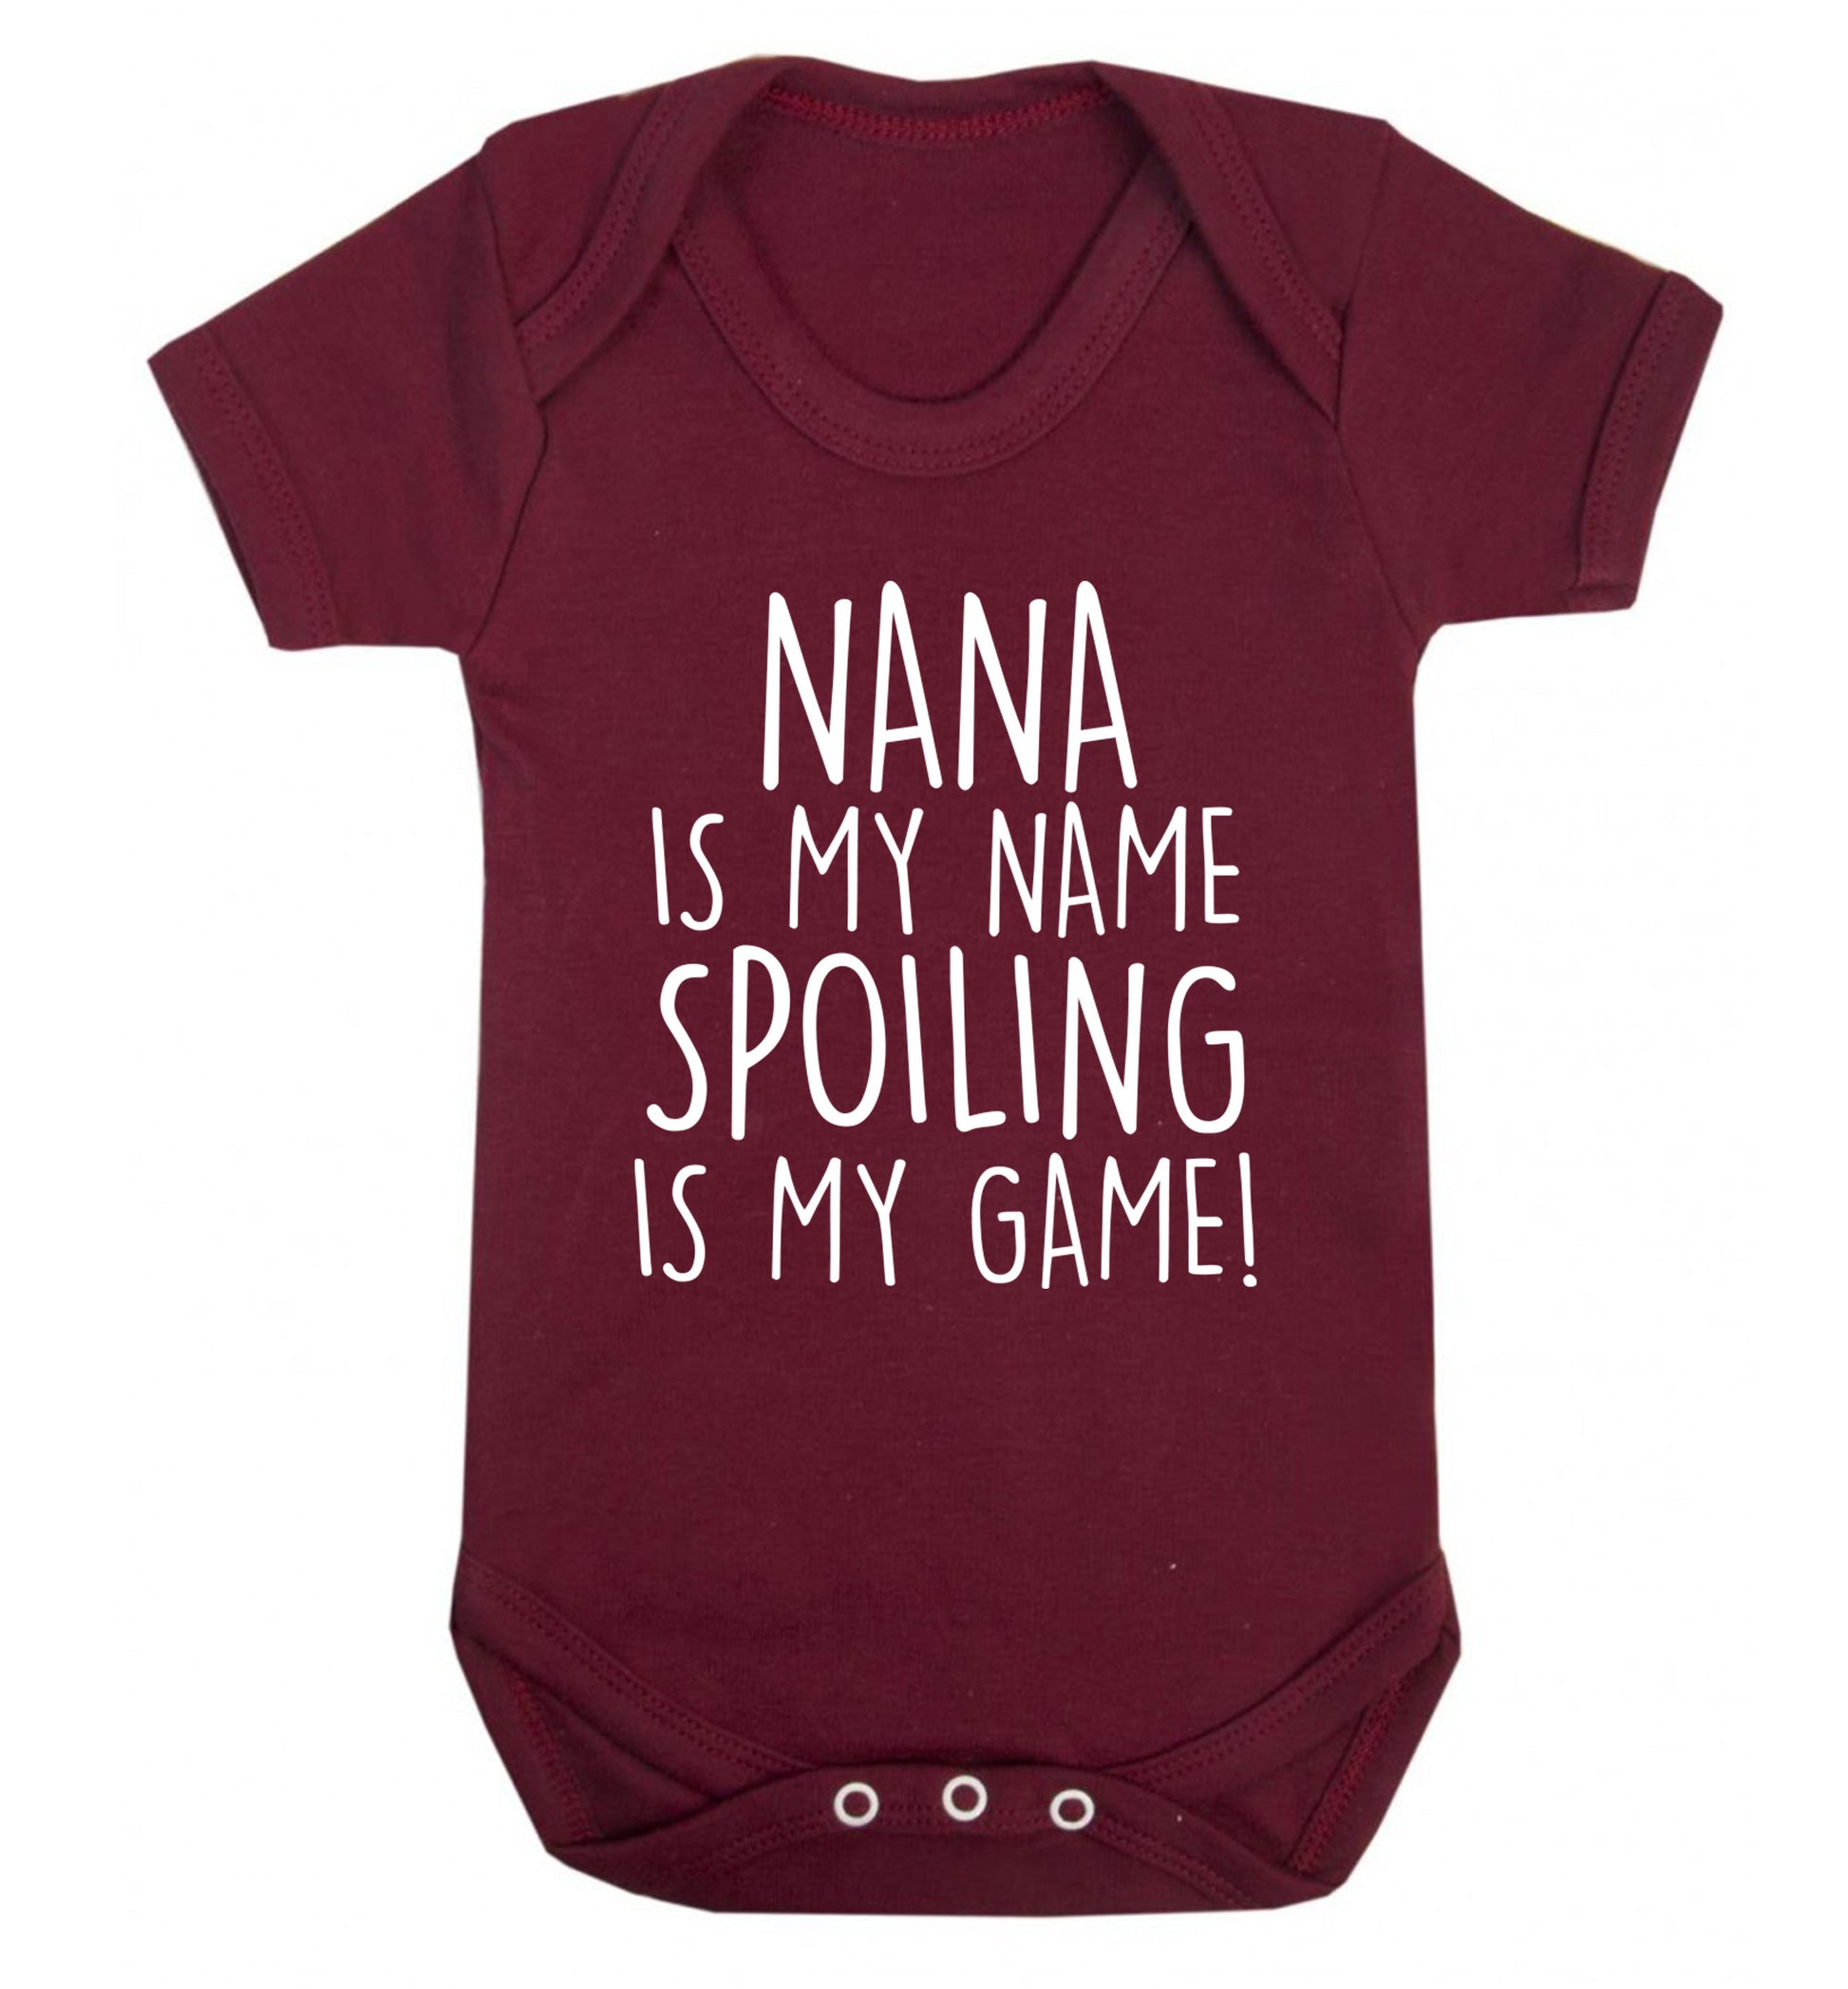 Nana is my name, spoiling is my game Baby Vest maroon 18-24 months